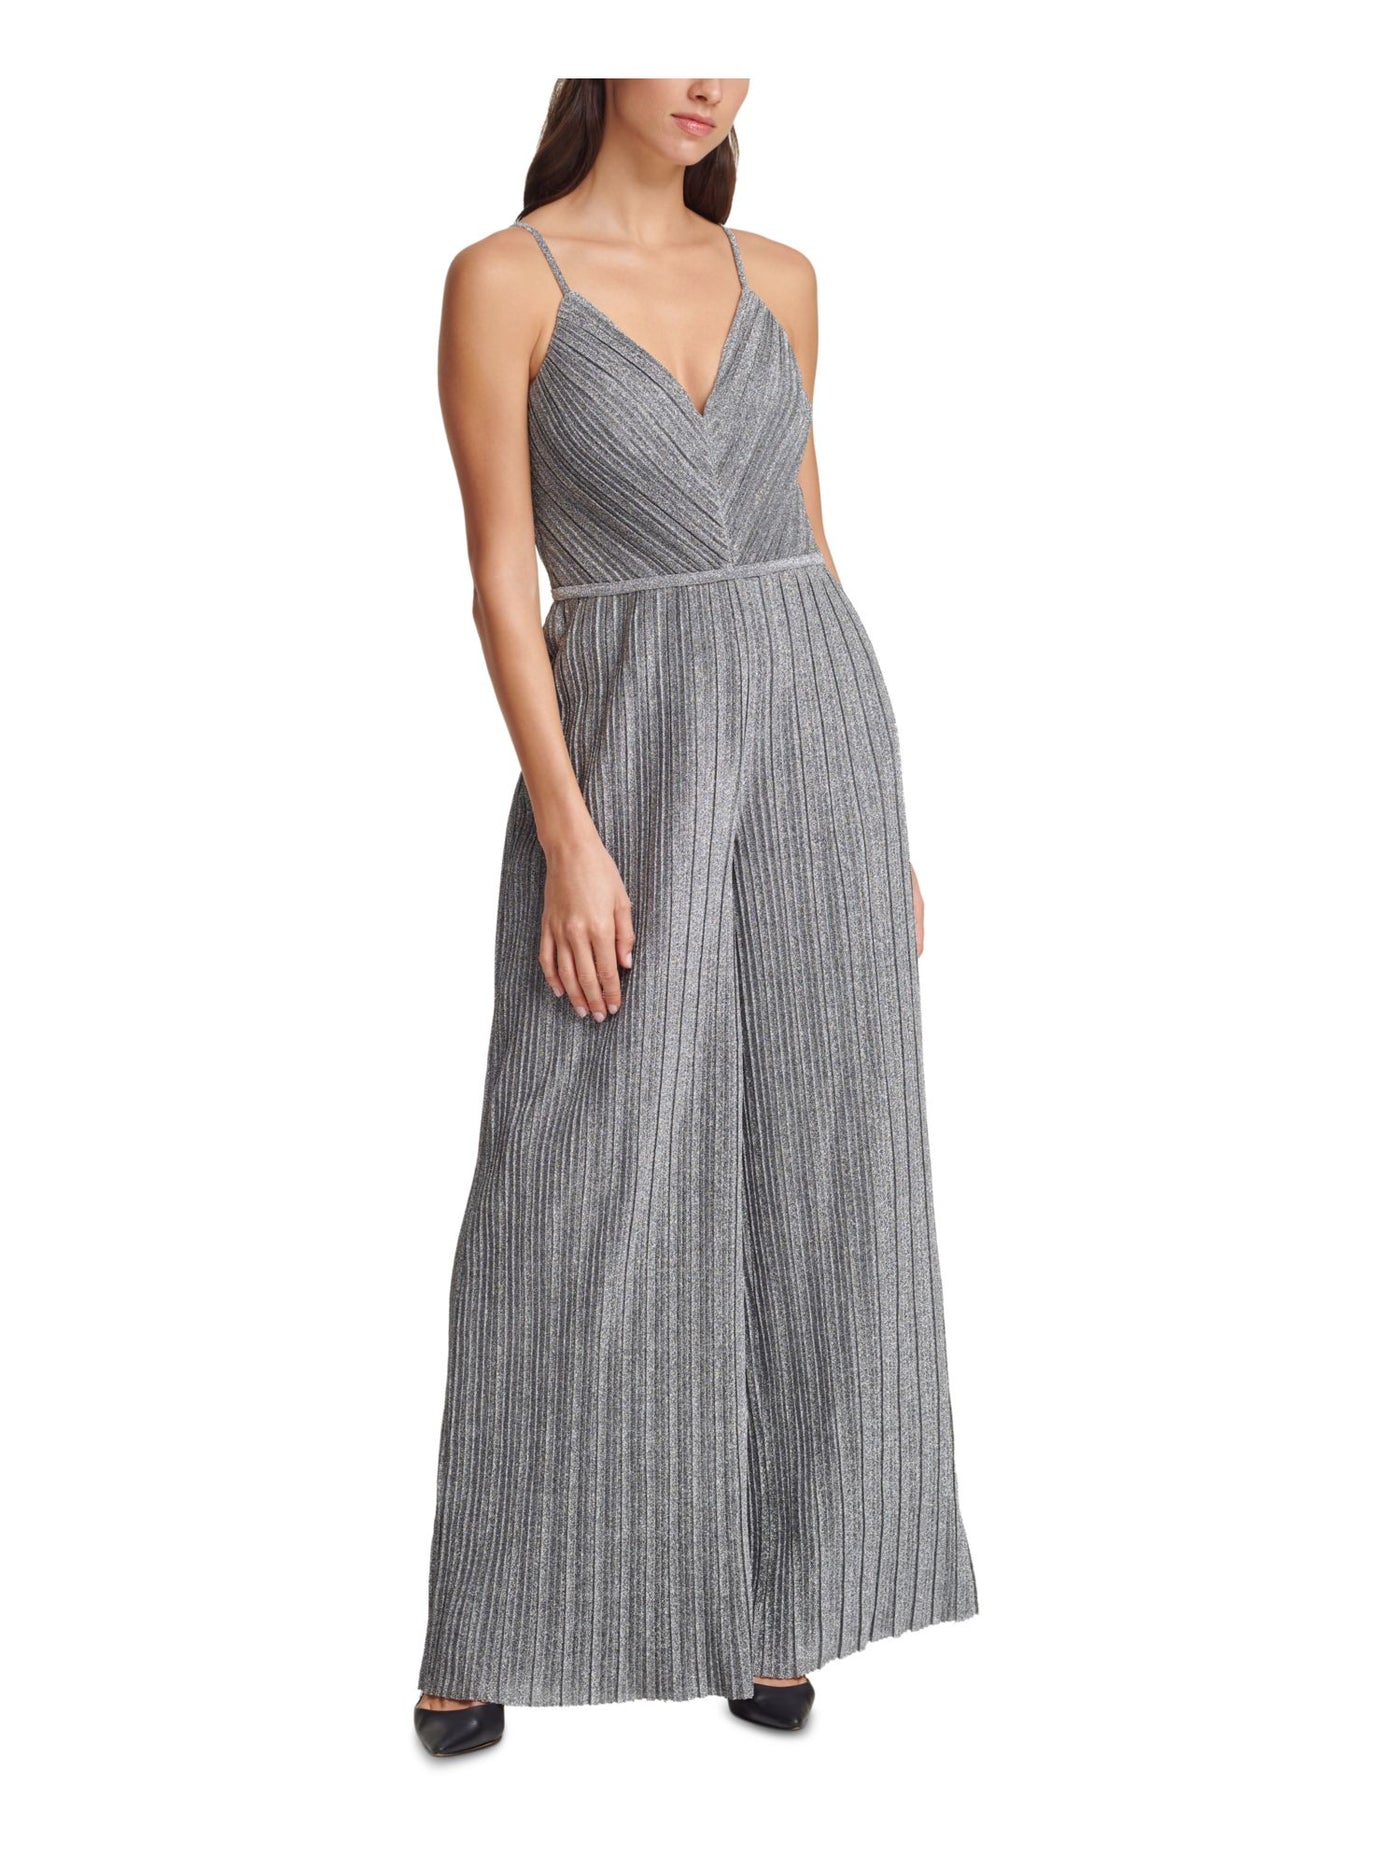 VINCE CAMUTO Womens Pleated Metallic Spaghetti Strap V Neck Party Wide Leg Jumpsuit